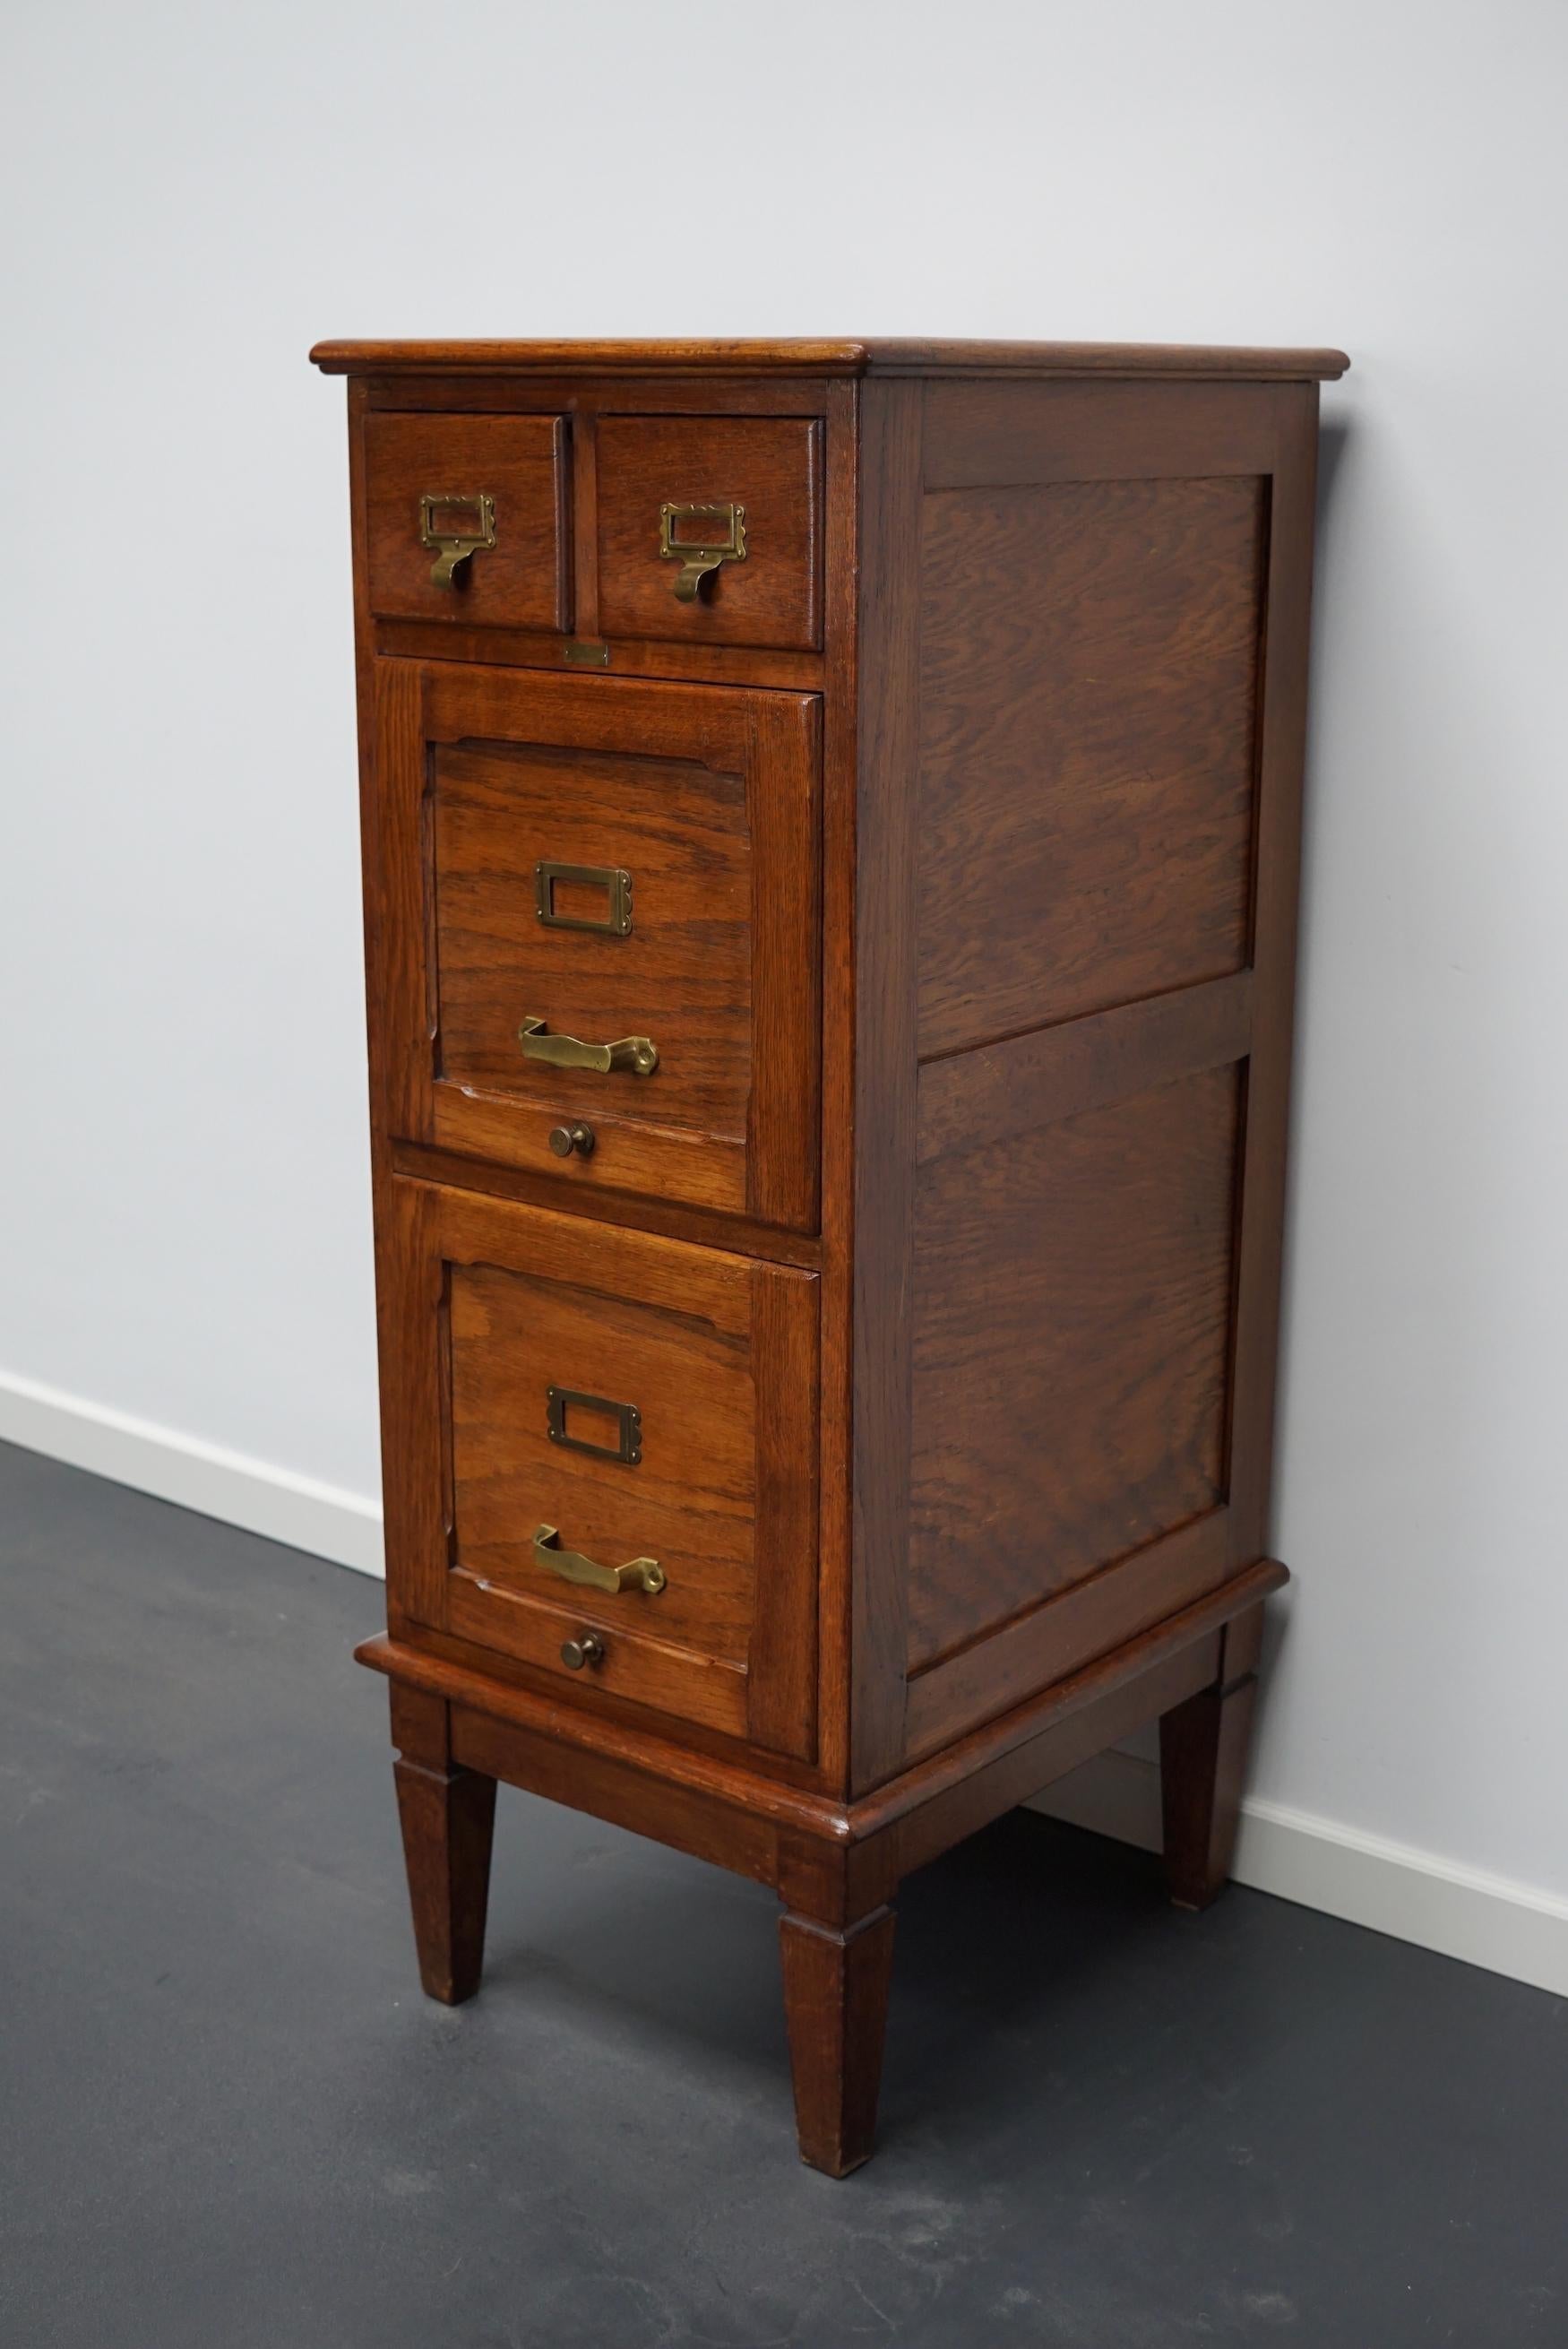 Very nice French oak filing cabinet with two small and two large drawers with brass hardware. It is very well made and in a good antique condition. The interior dimension of the drawers are: D W H 32 x 15 x 5 / 8 cm and 45 x 33 x 12 / 26 cm.